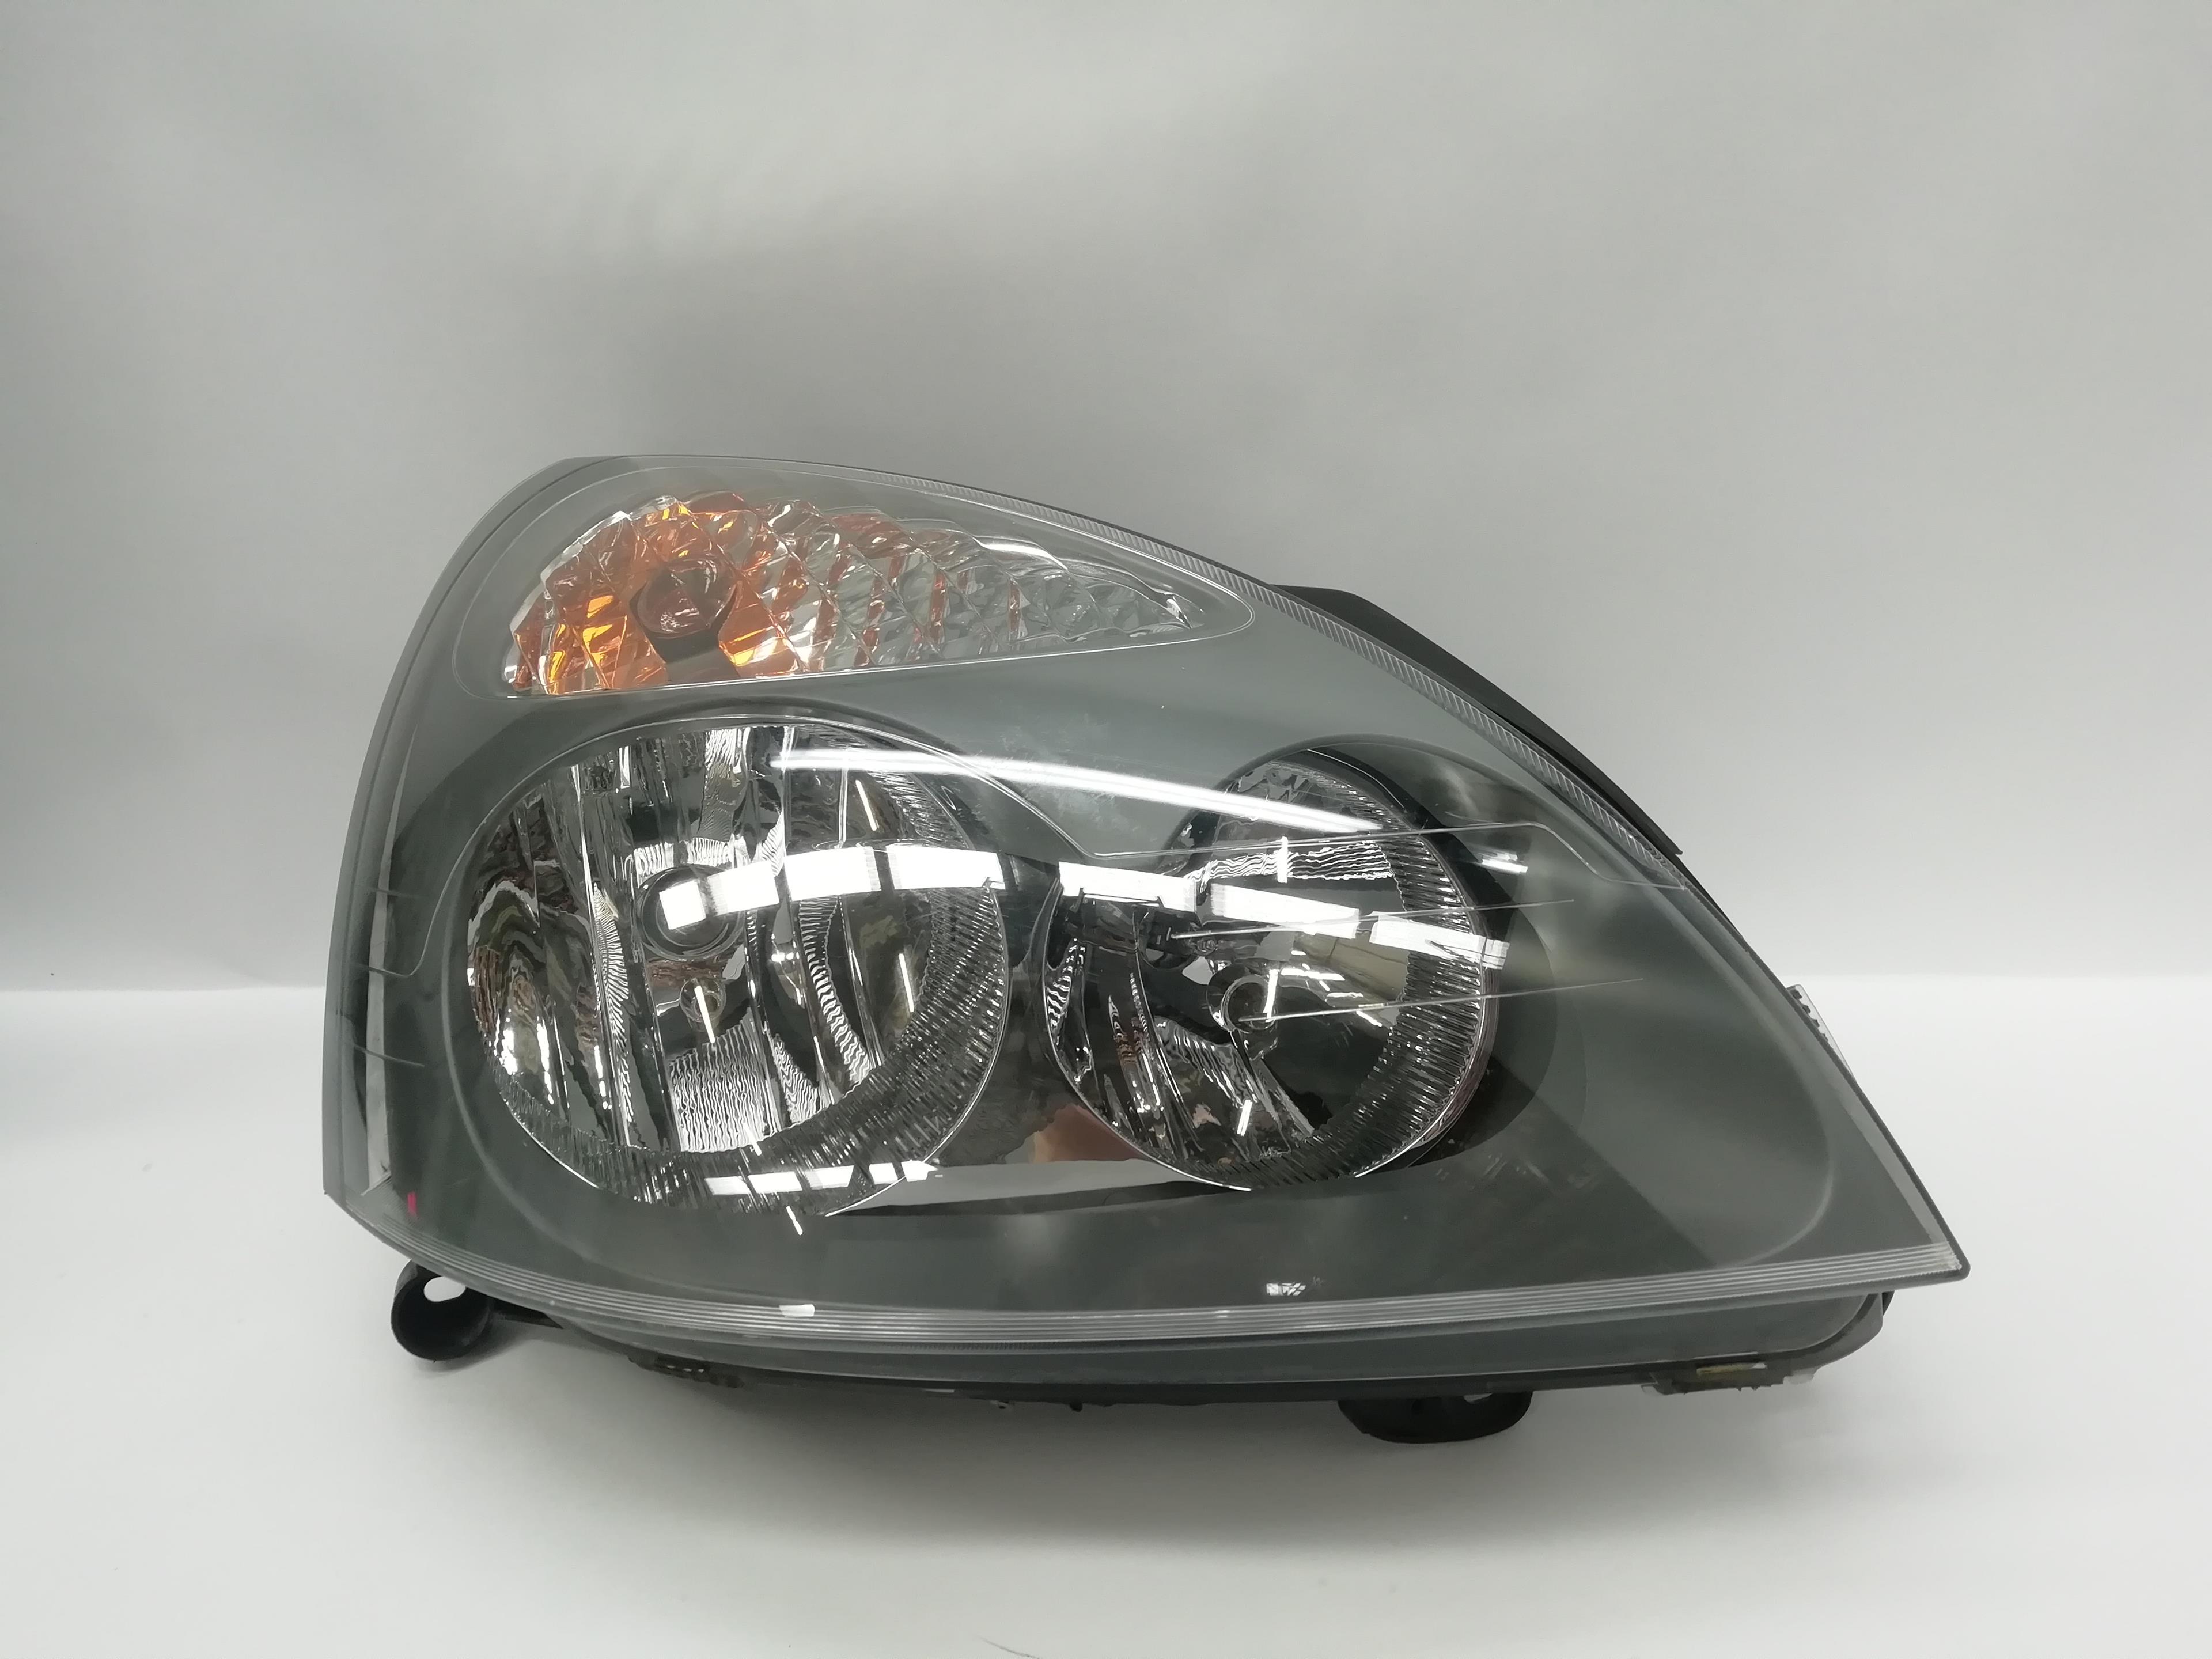 RENAULT Clio 3 generation (2005-2012) Front Right Headlight 260105183R 25197216